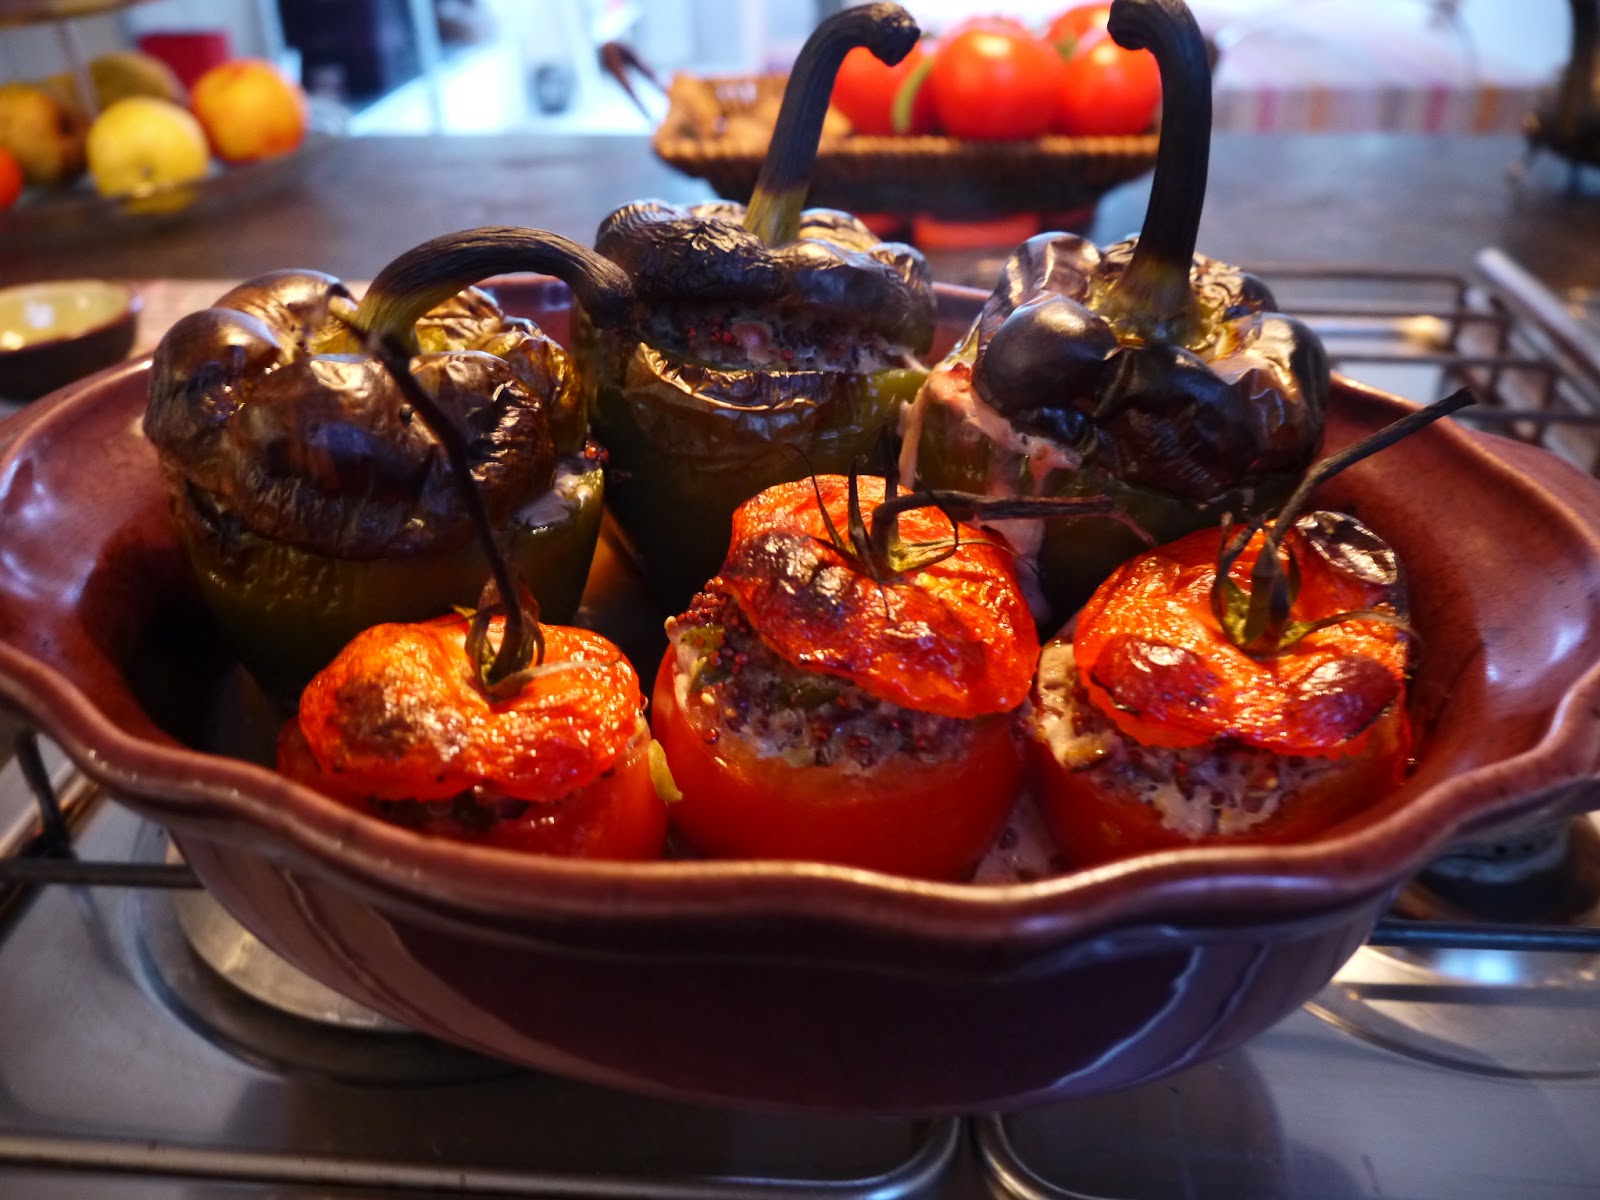 New age stuffed tomatoes by Appetit Voyage